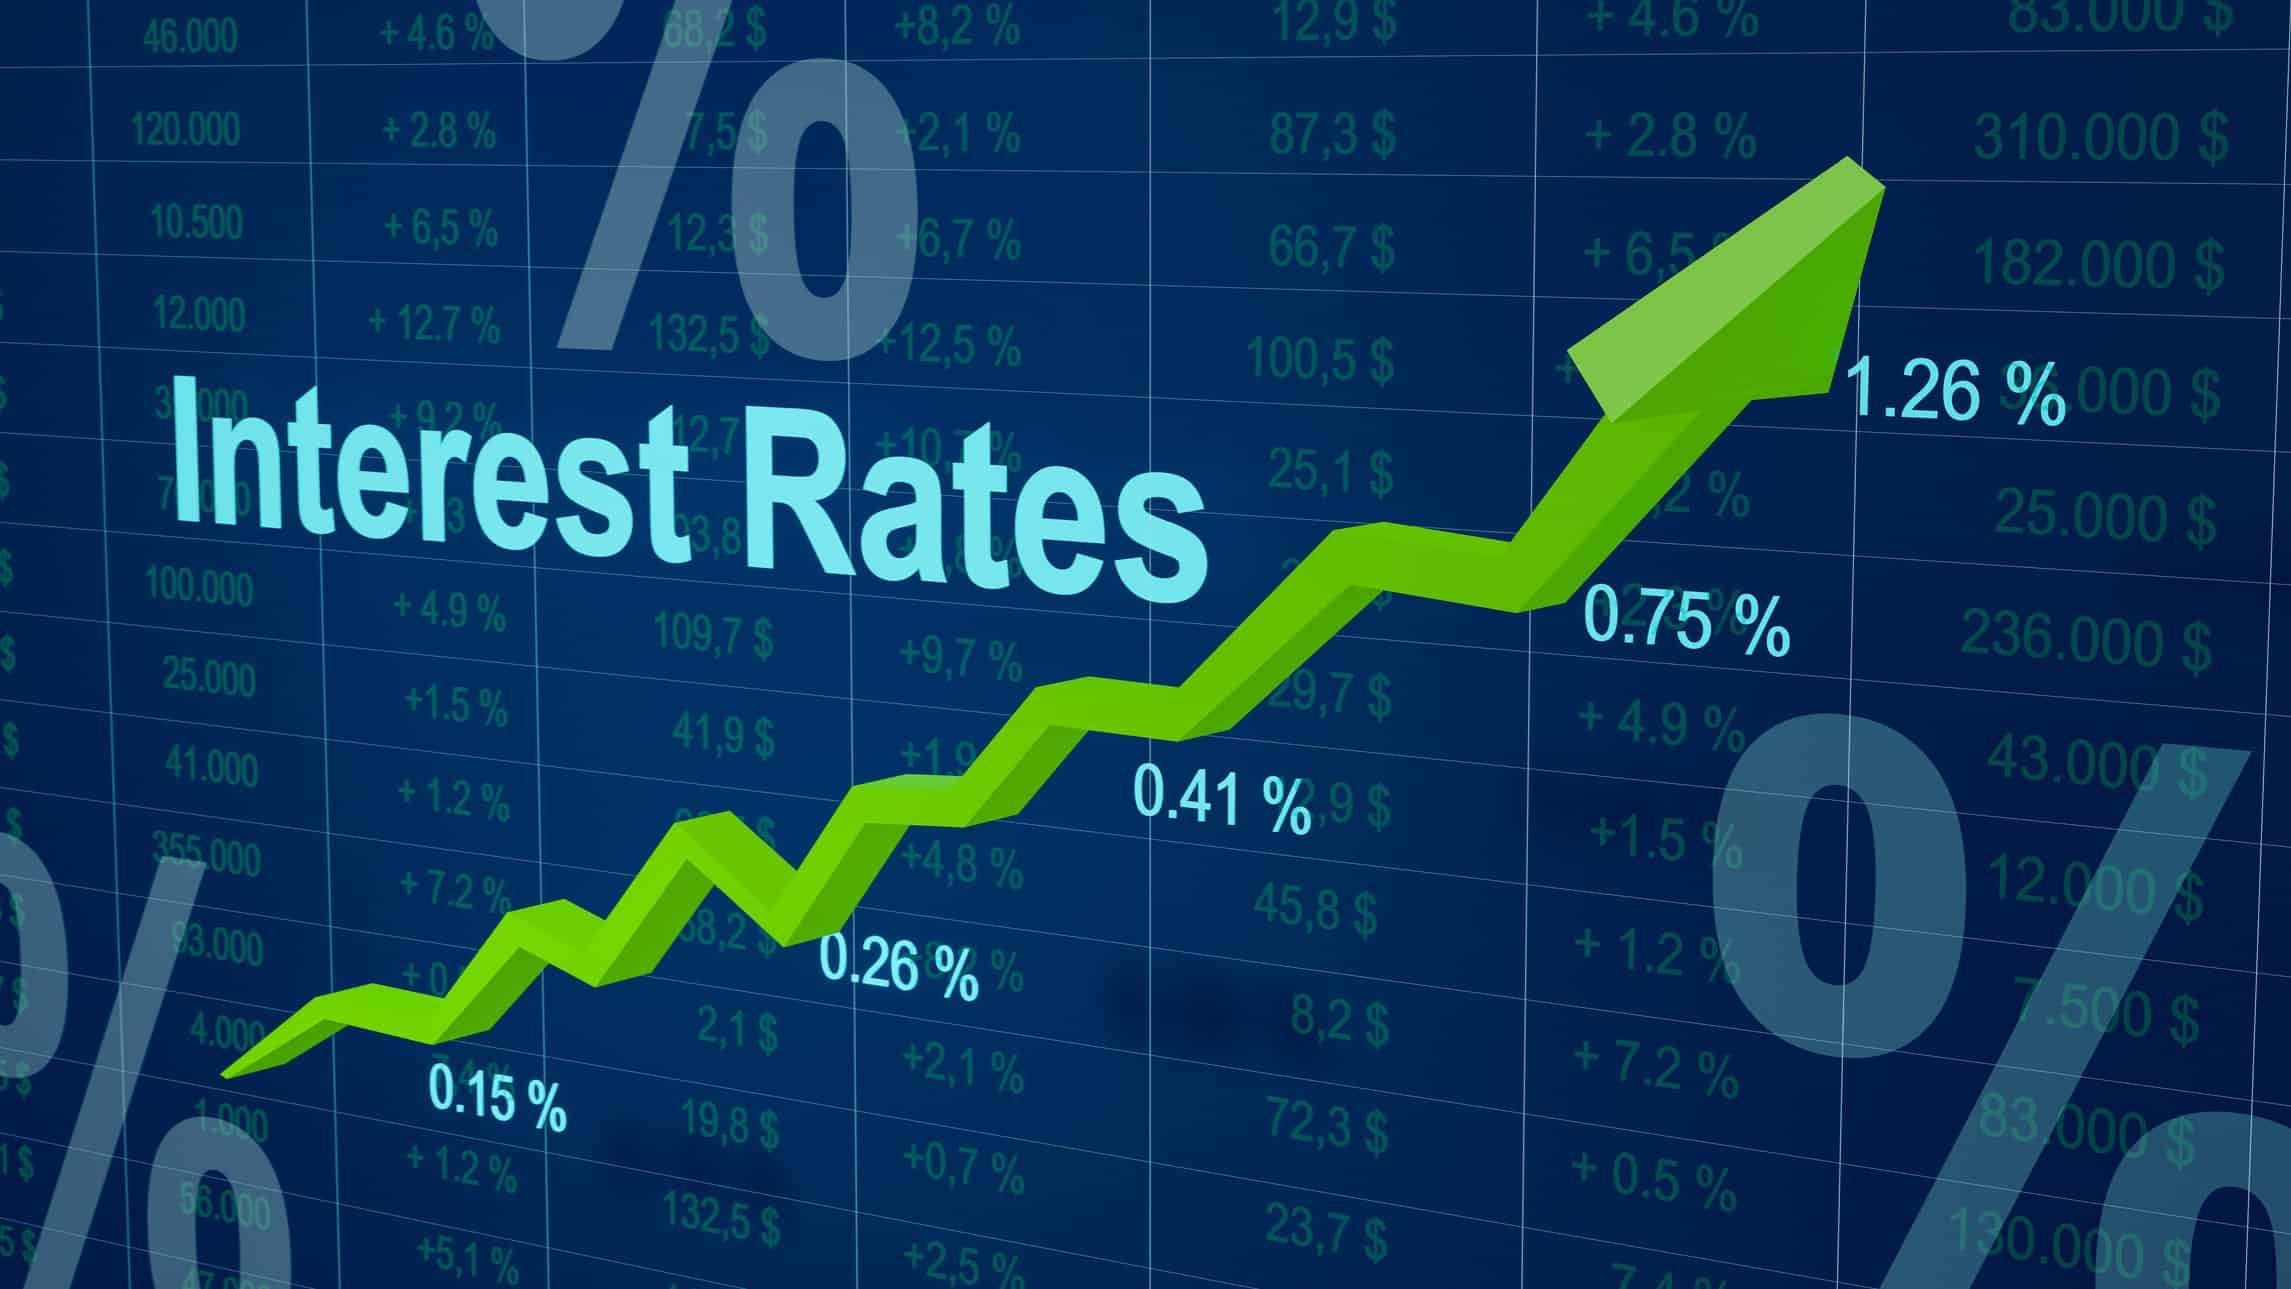 Interest rate written with a green arrow going up.